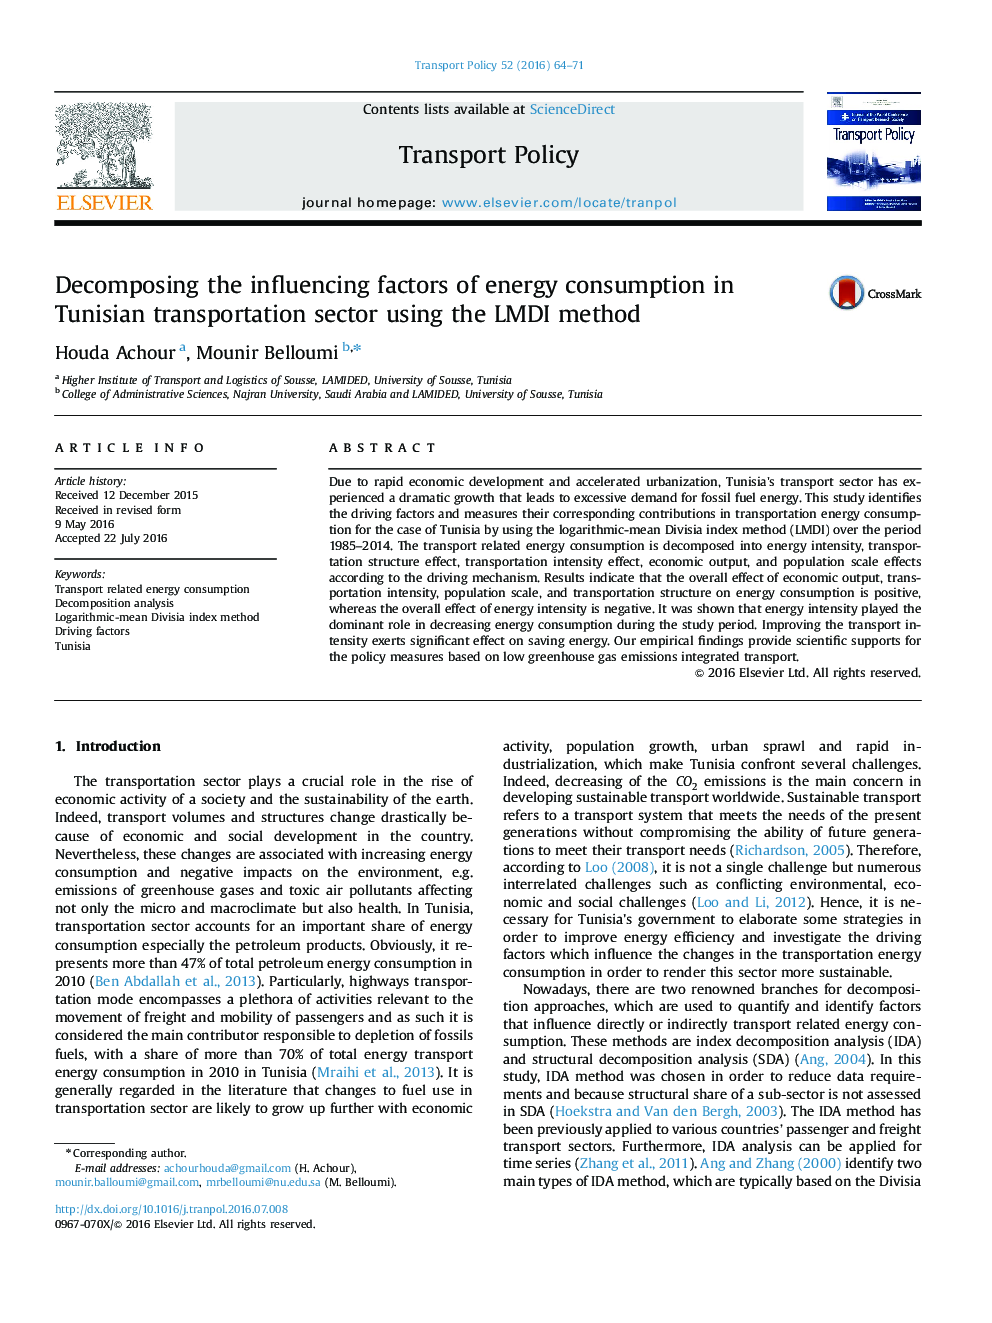 Decomposing the influencing factors of energy consumption in Tunisian transportation sector using the LMDI method